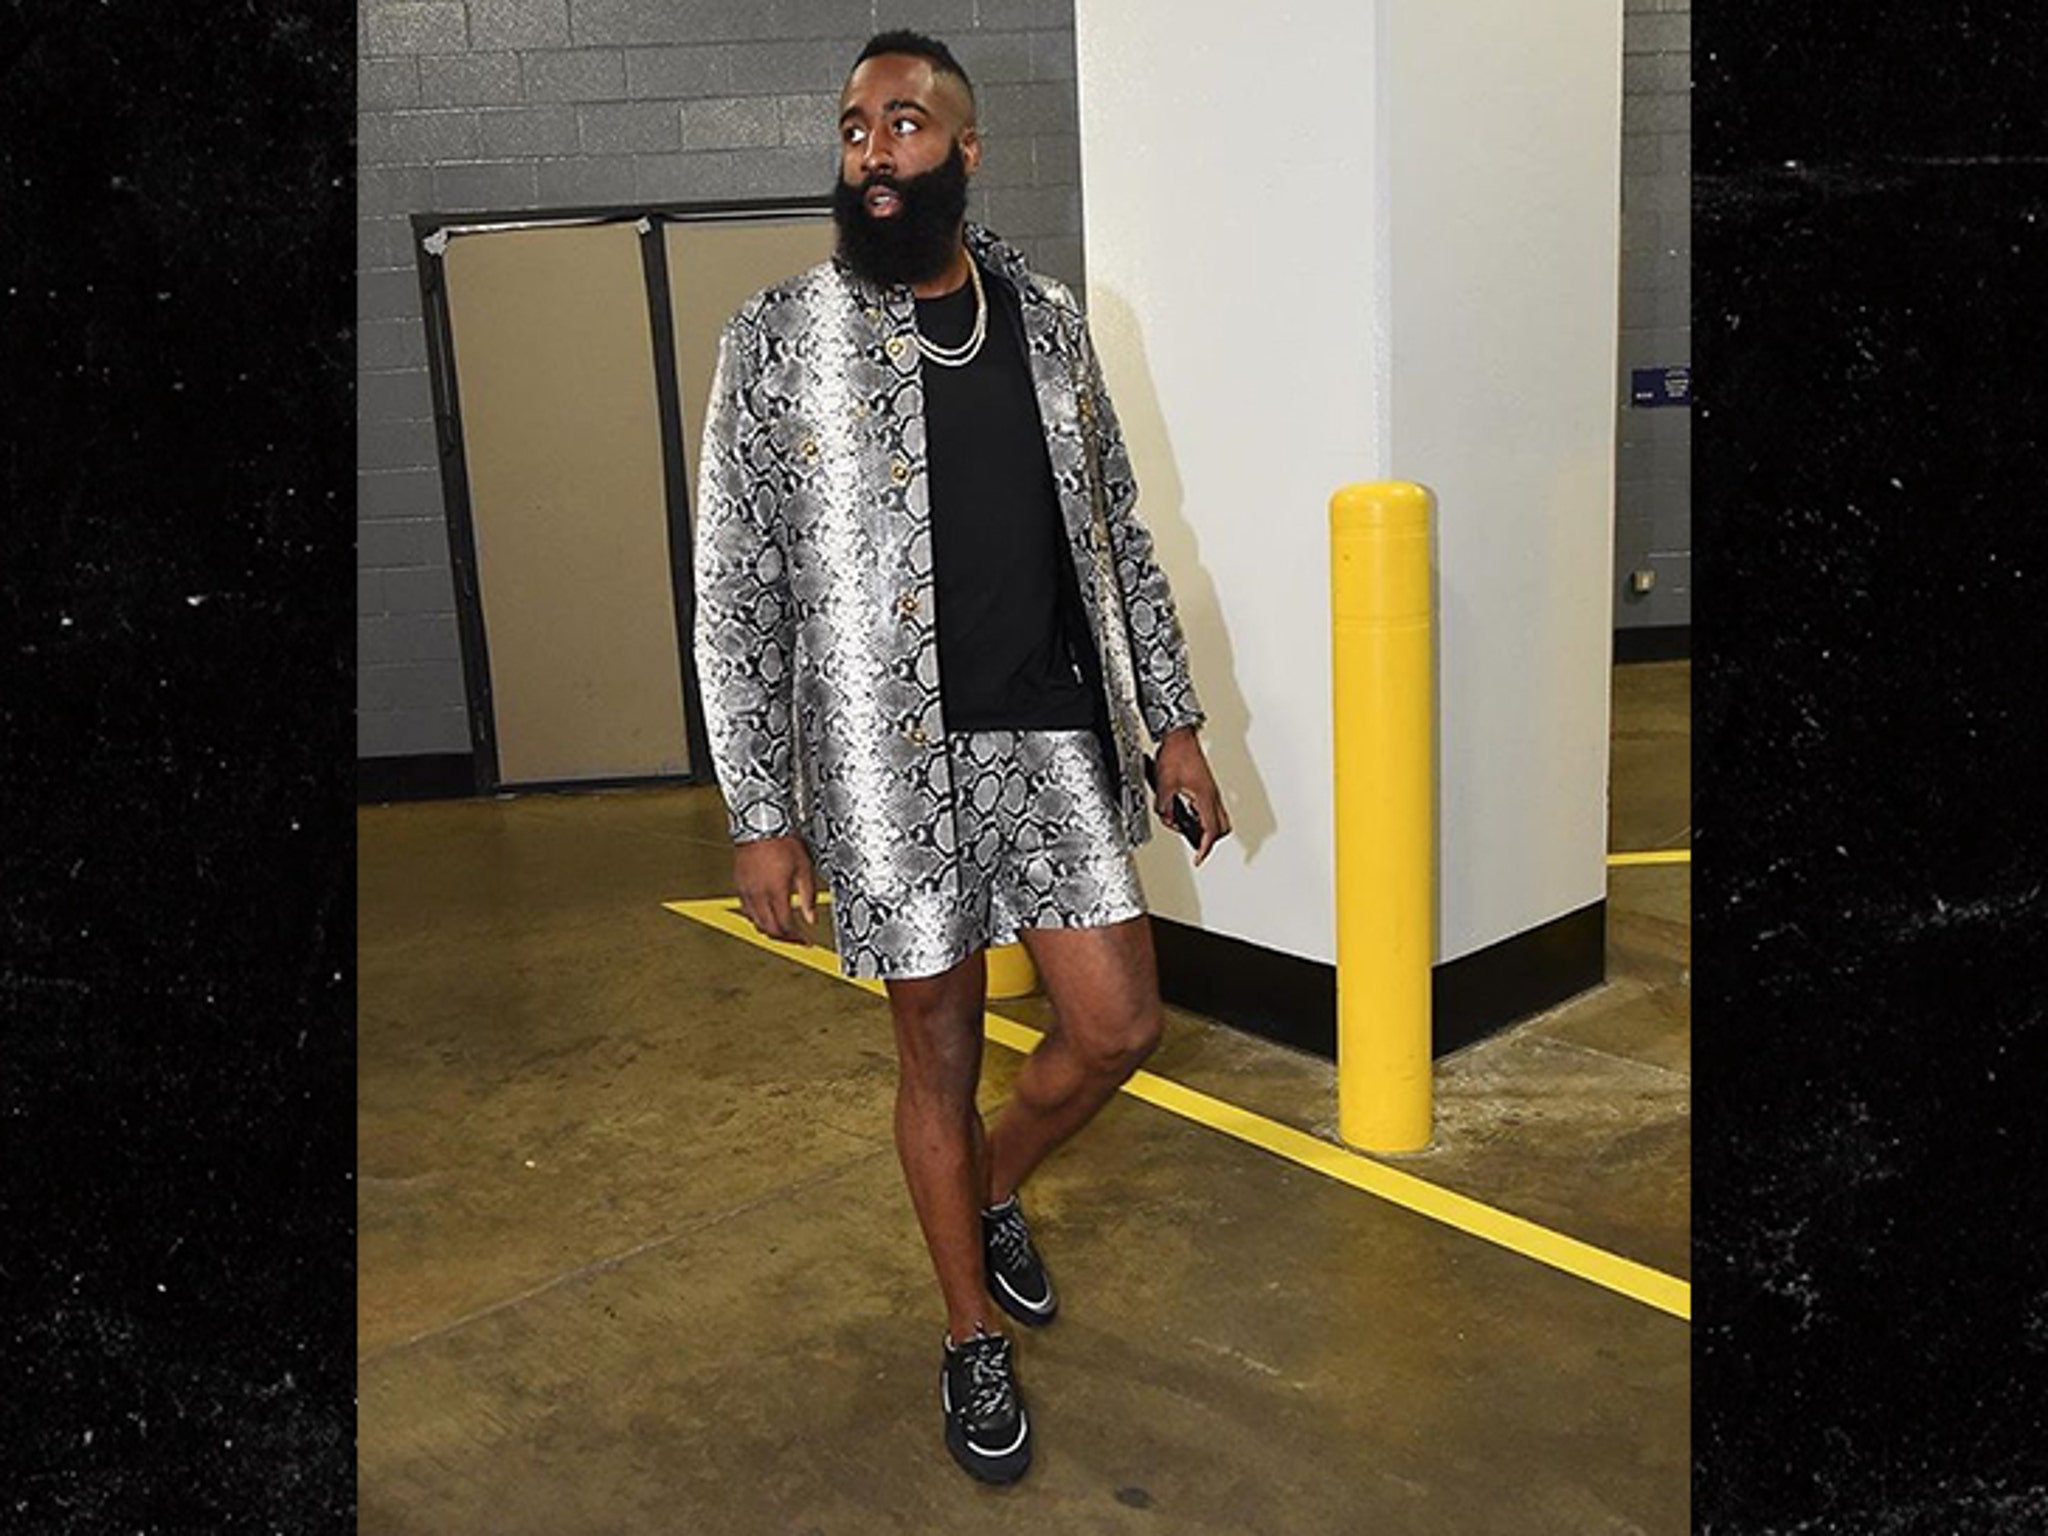 style james harden outfits